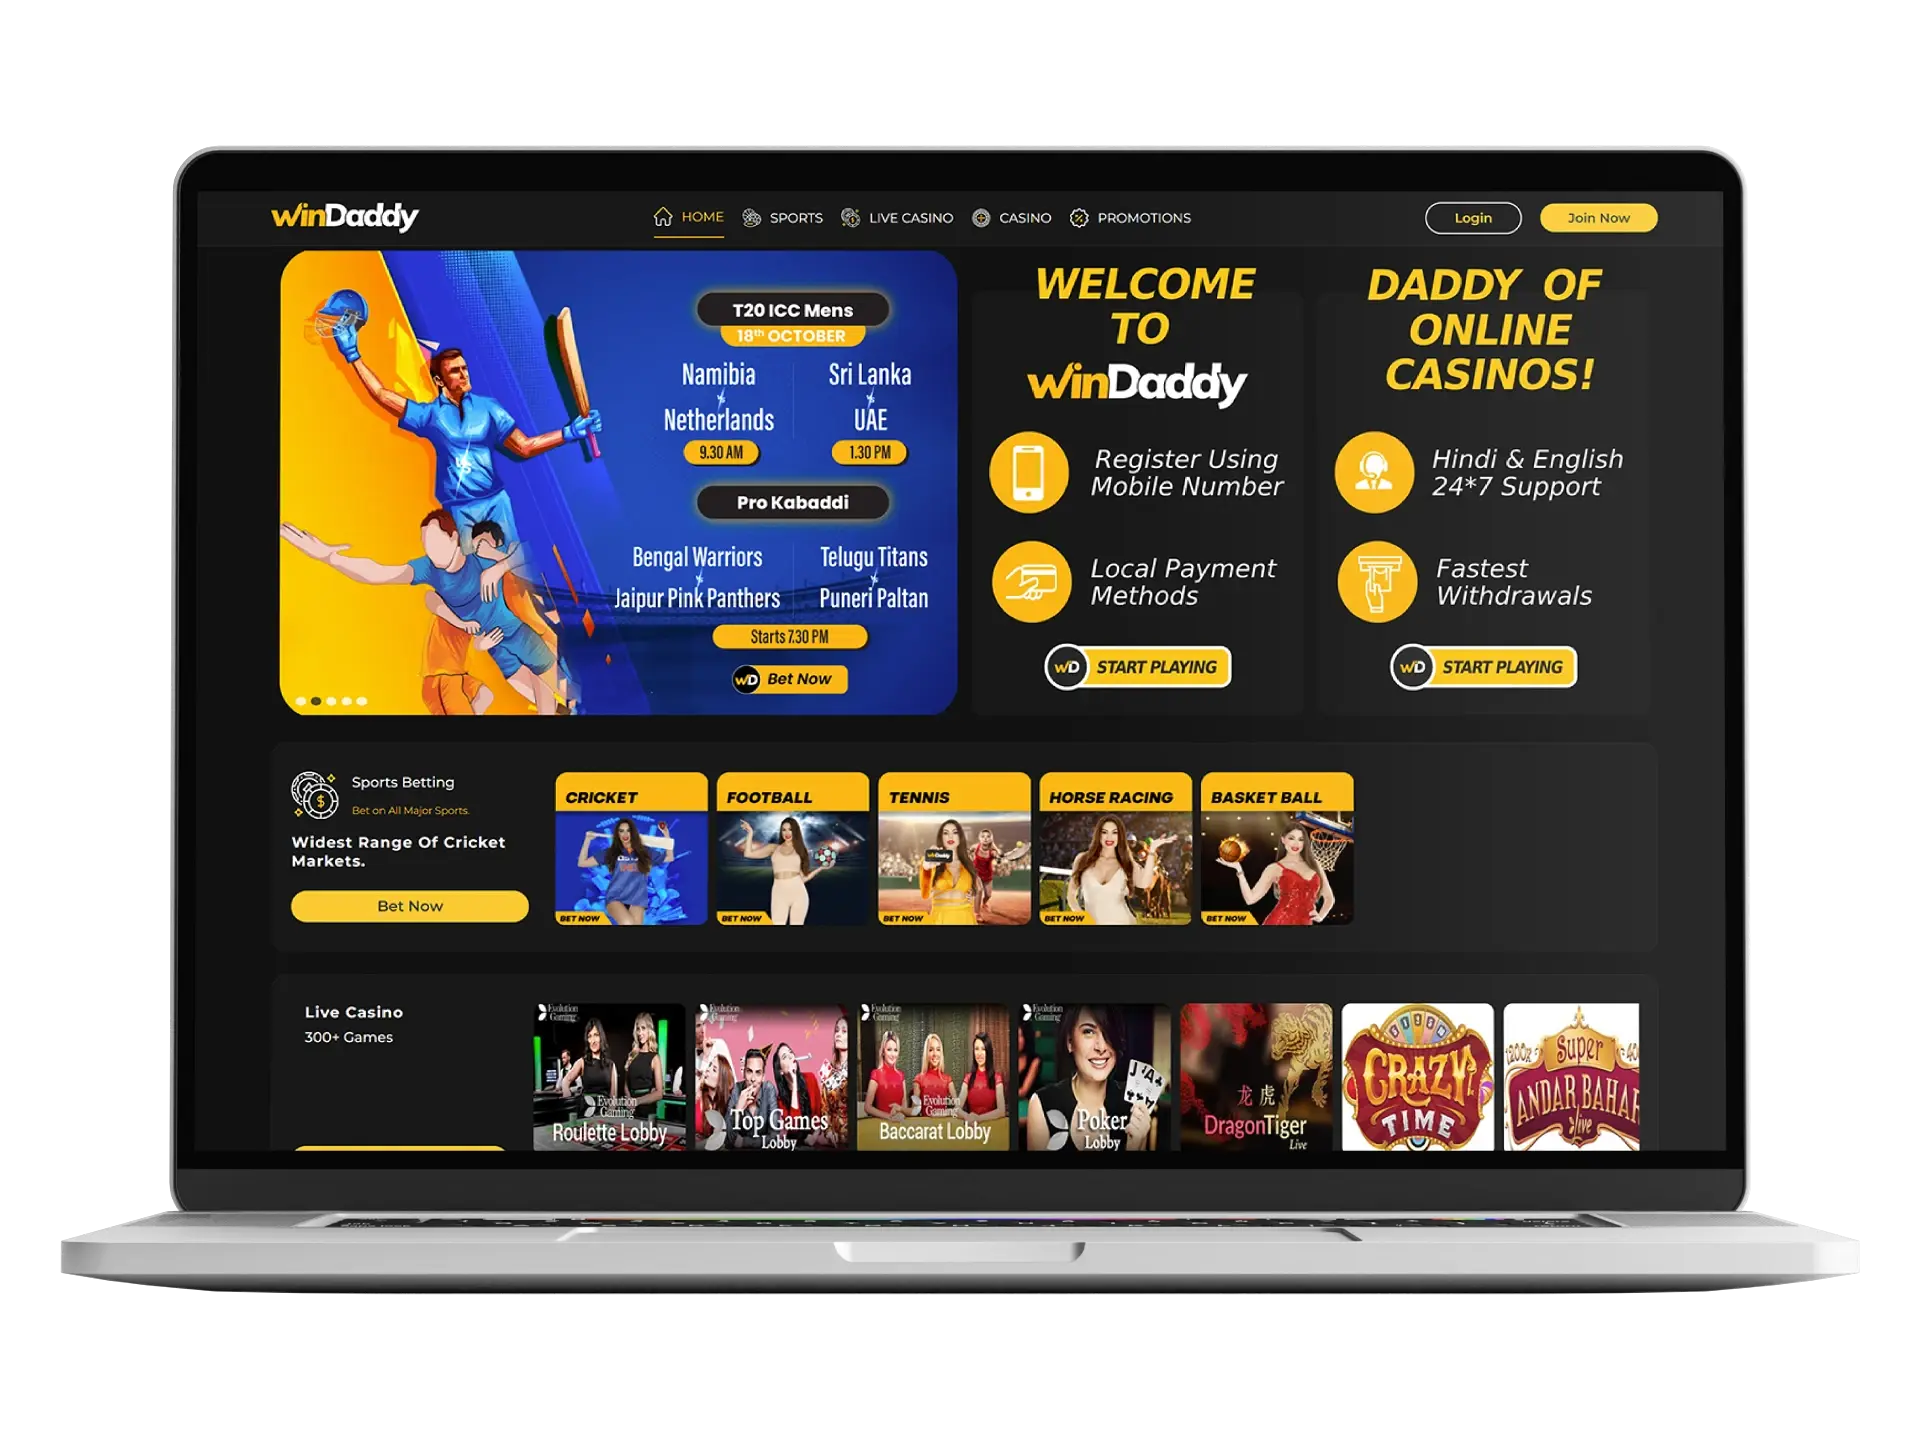 Windaddy provides everything you need for stock betting on dozens of sports disciplines.